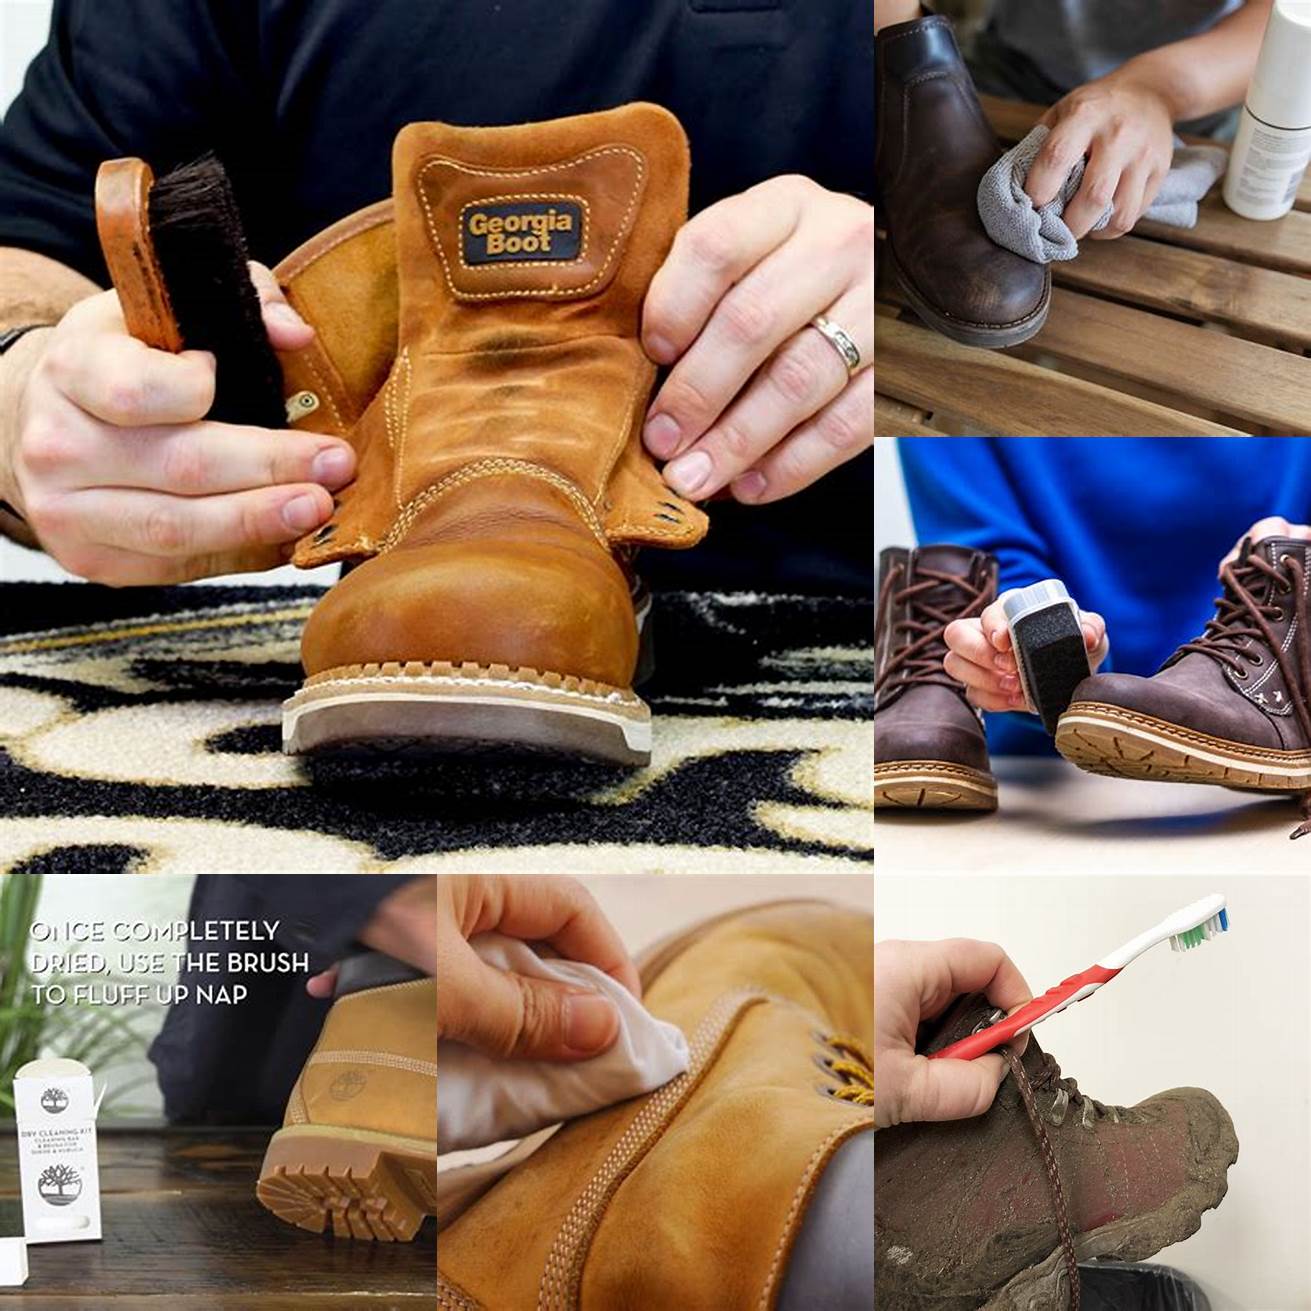 1 Clean your boots regularly with a soft cloth to remove dirt and dust